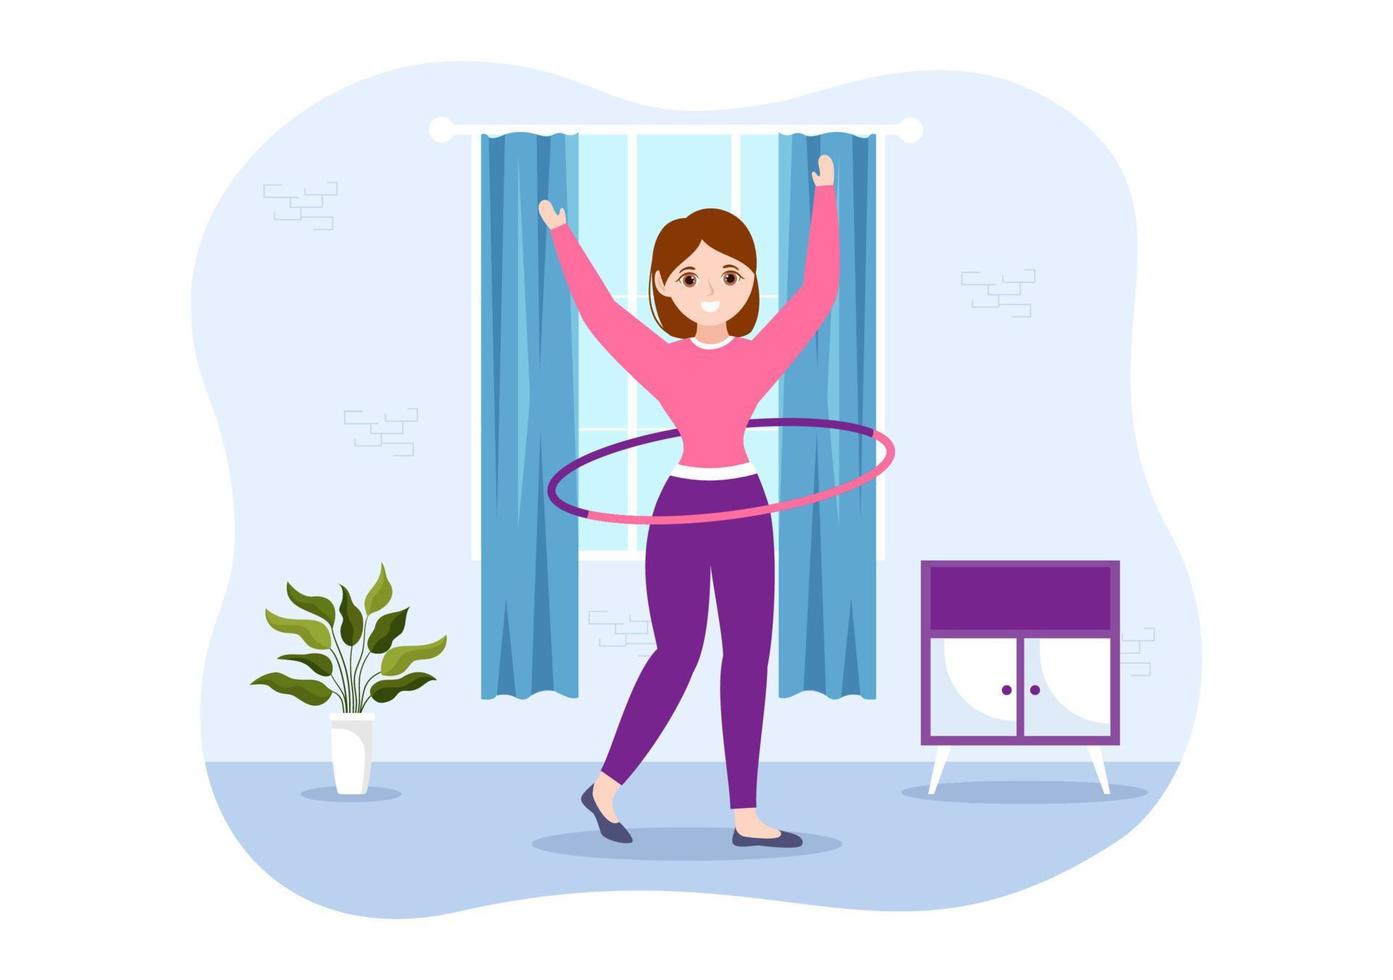 Hula Hoop Illustration with People Exercising Playing Hula Hoops and Fitness Training in Sports Activity Flat Cartoon Hand Drawn Templates vector